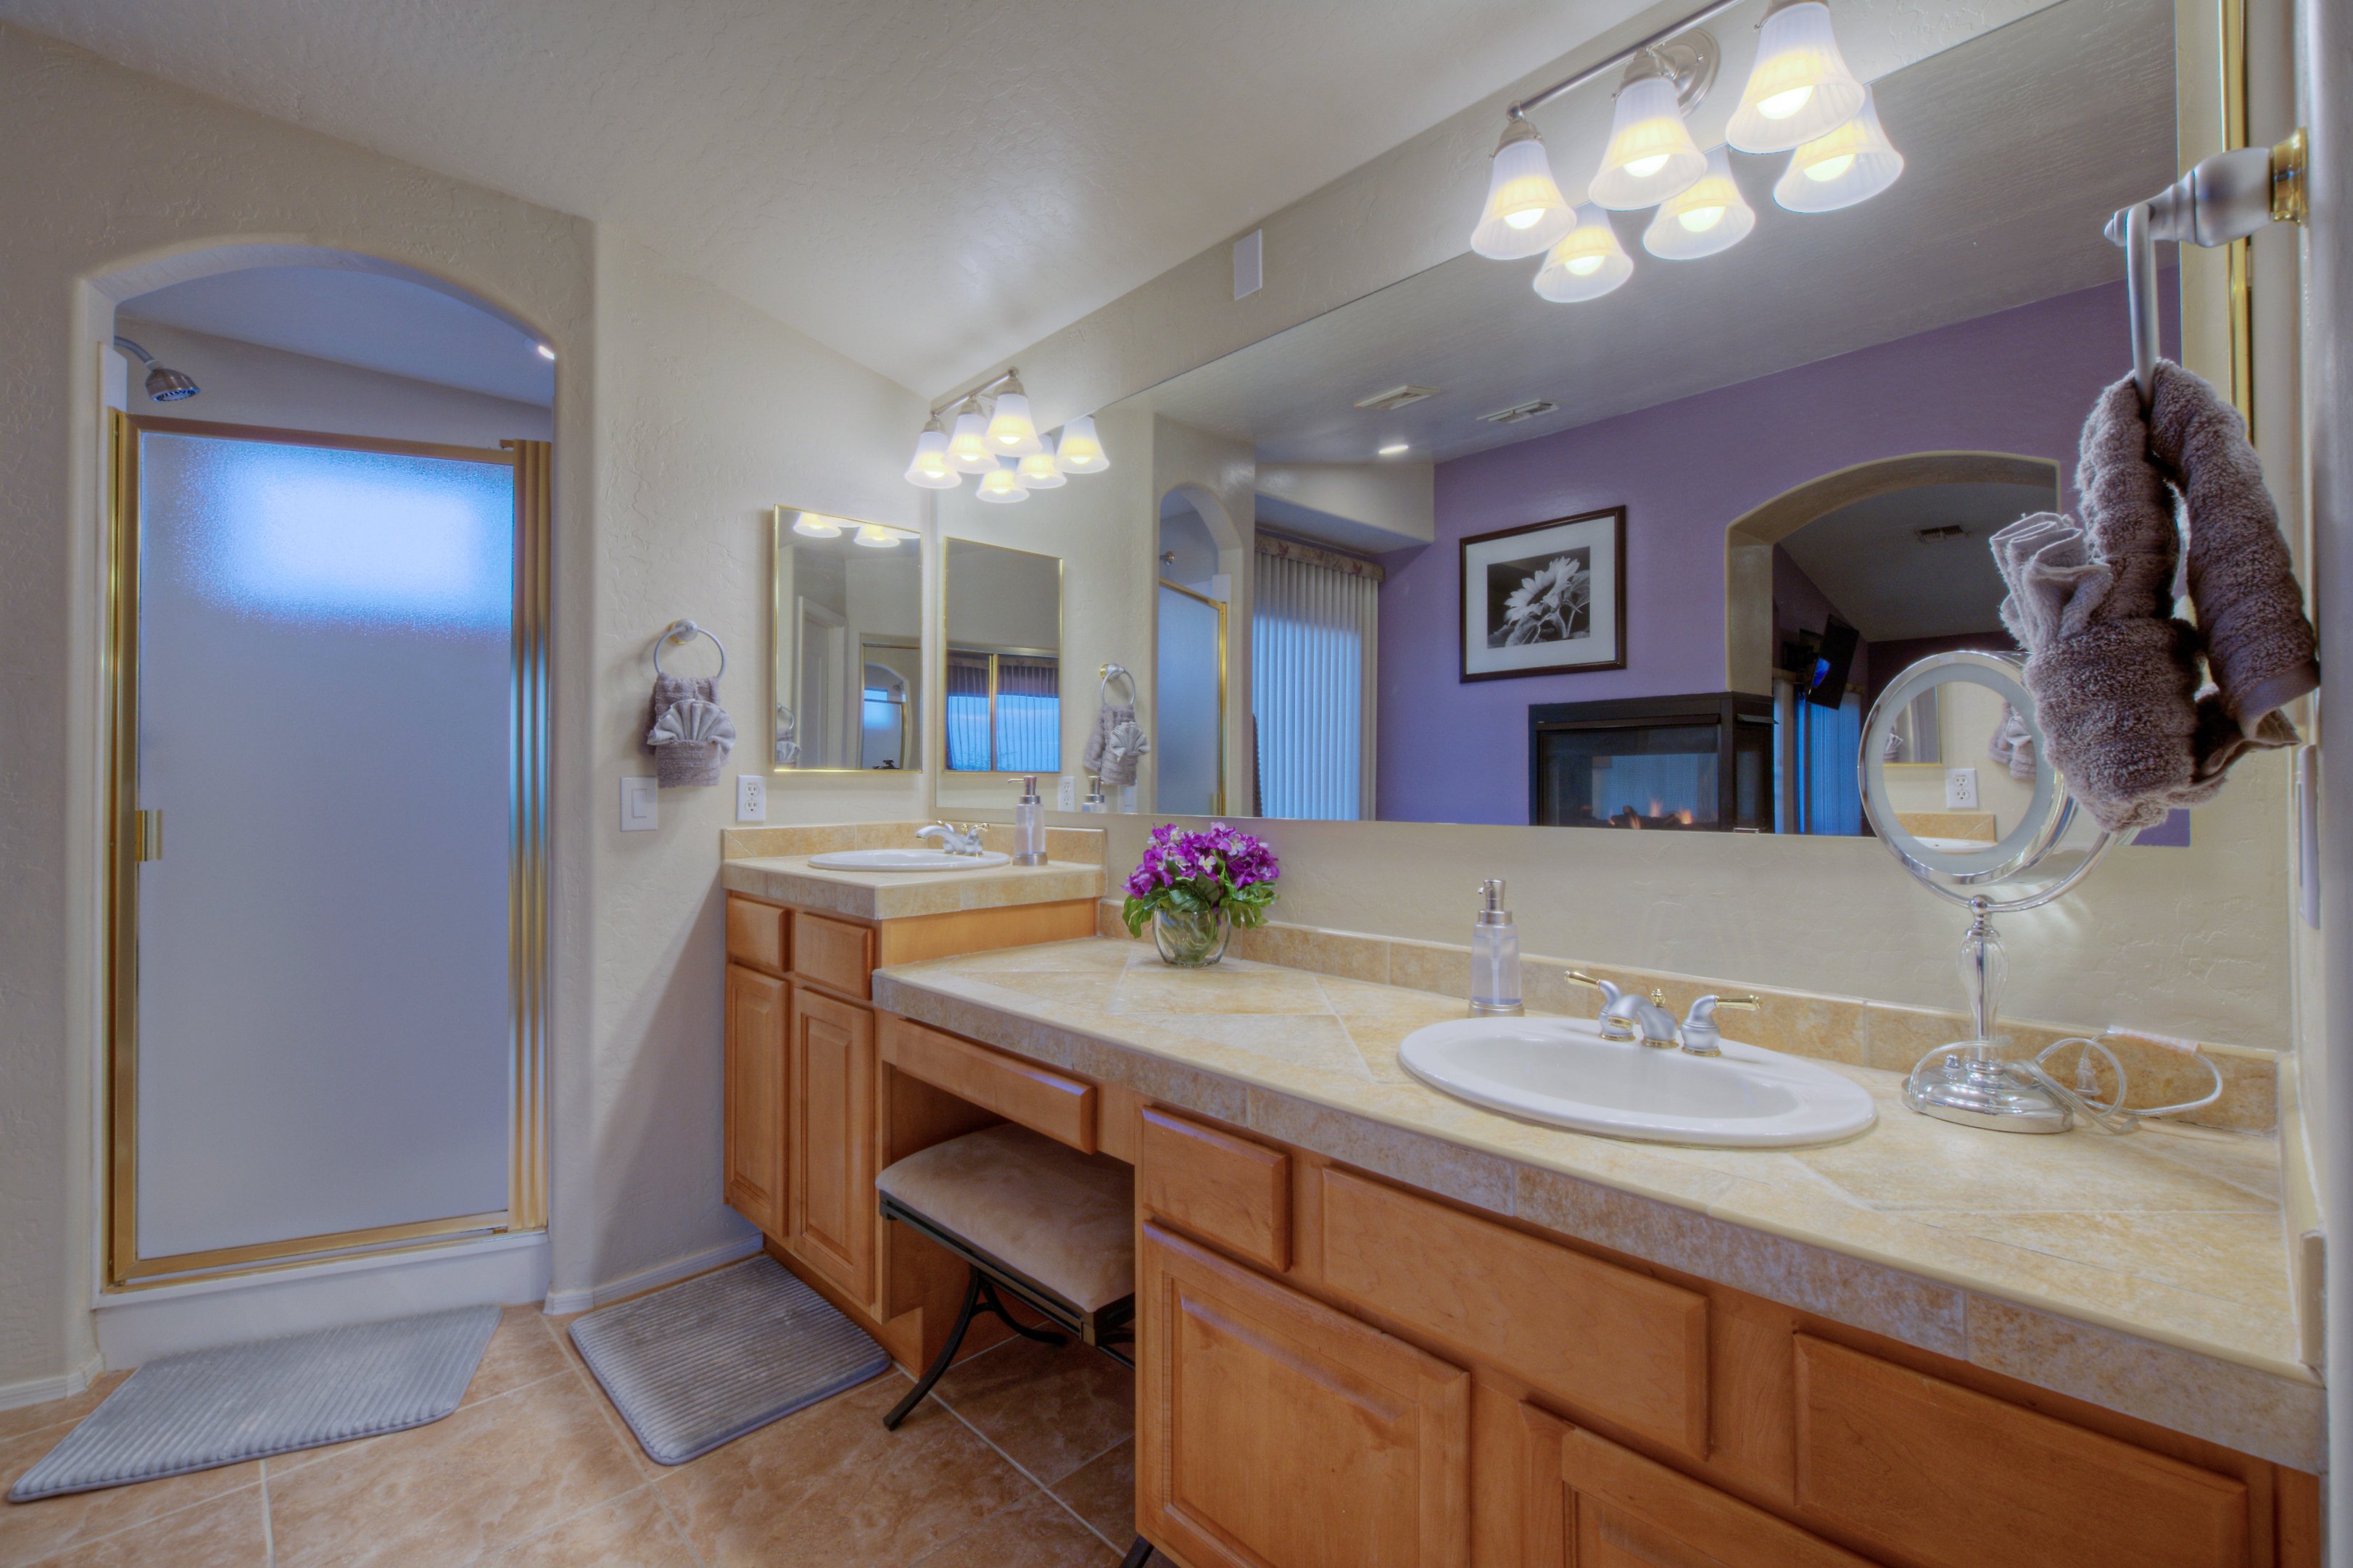 Primary suite includes a walk-in shower, dual vanity sinks and seated area for cosmetics and hair.